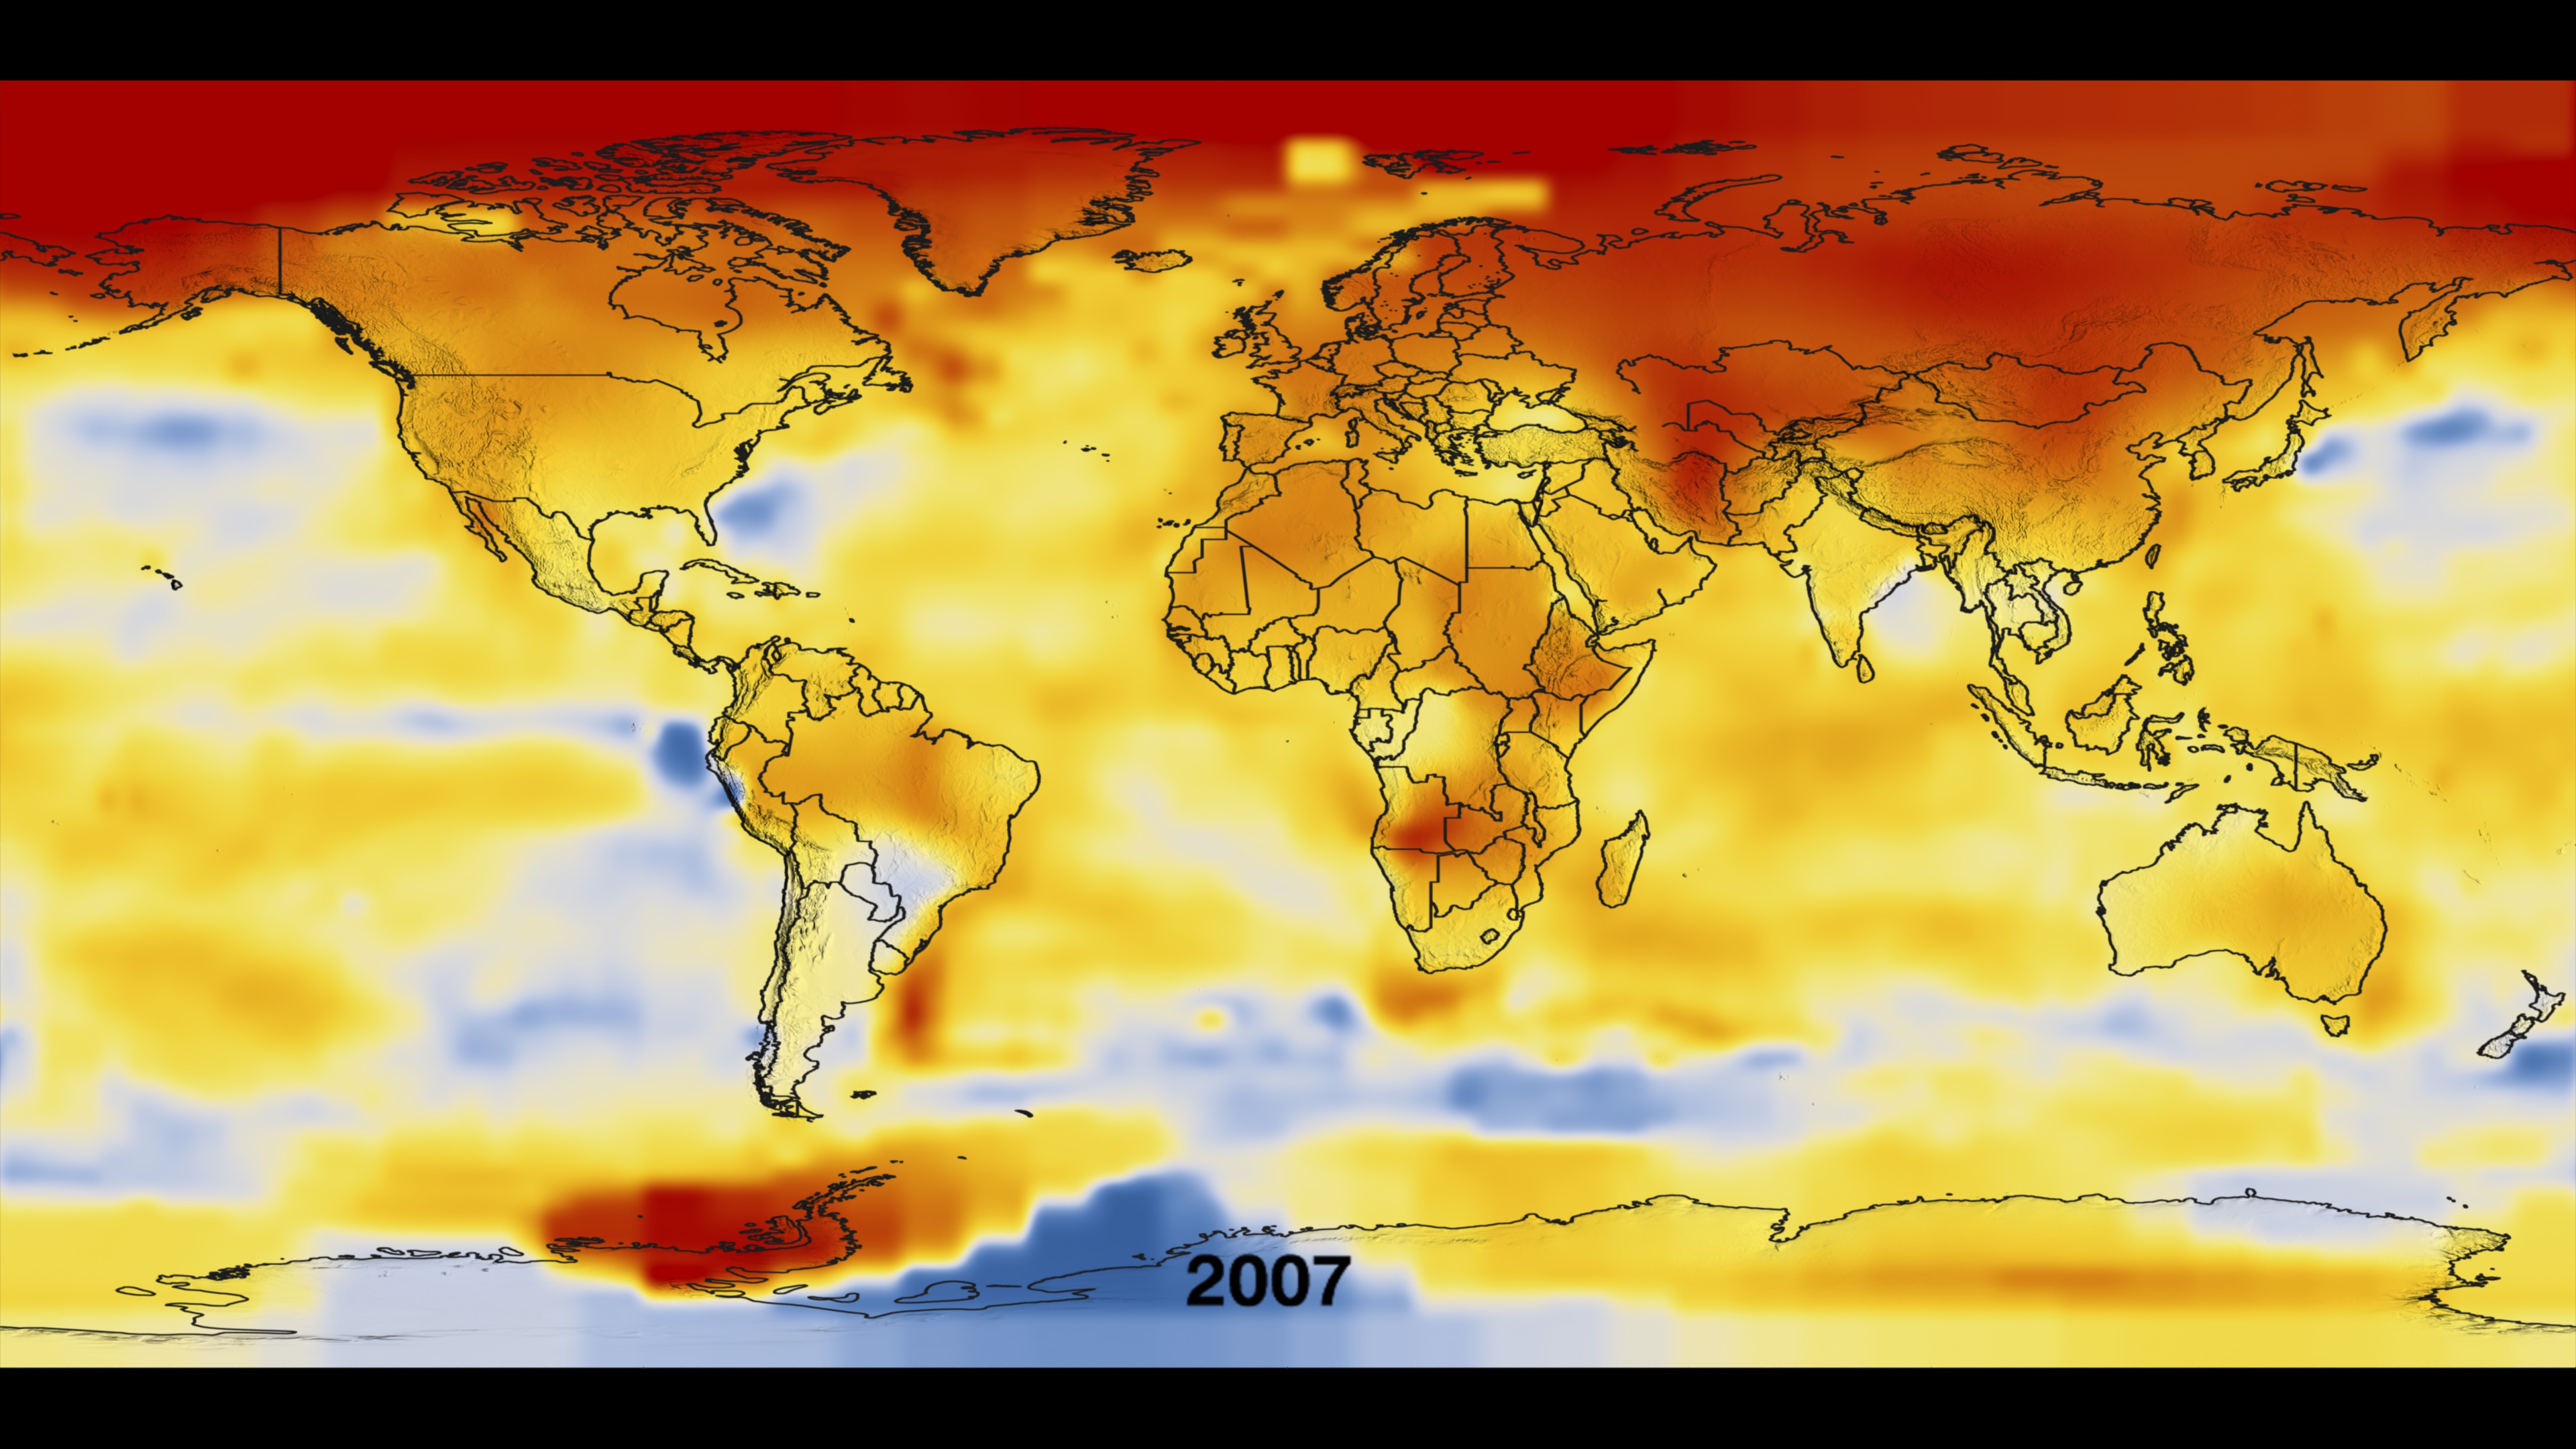 This data visualization of global temperature differences from 1881 to 2007.  Dark blue areas show regions where the temperature was cooler then the average temperature.  Red areas show regions where the temperature was warmer then the average.